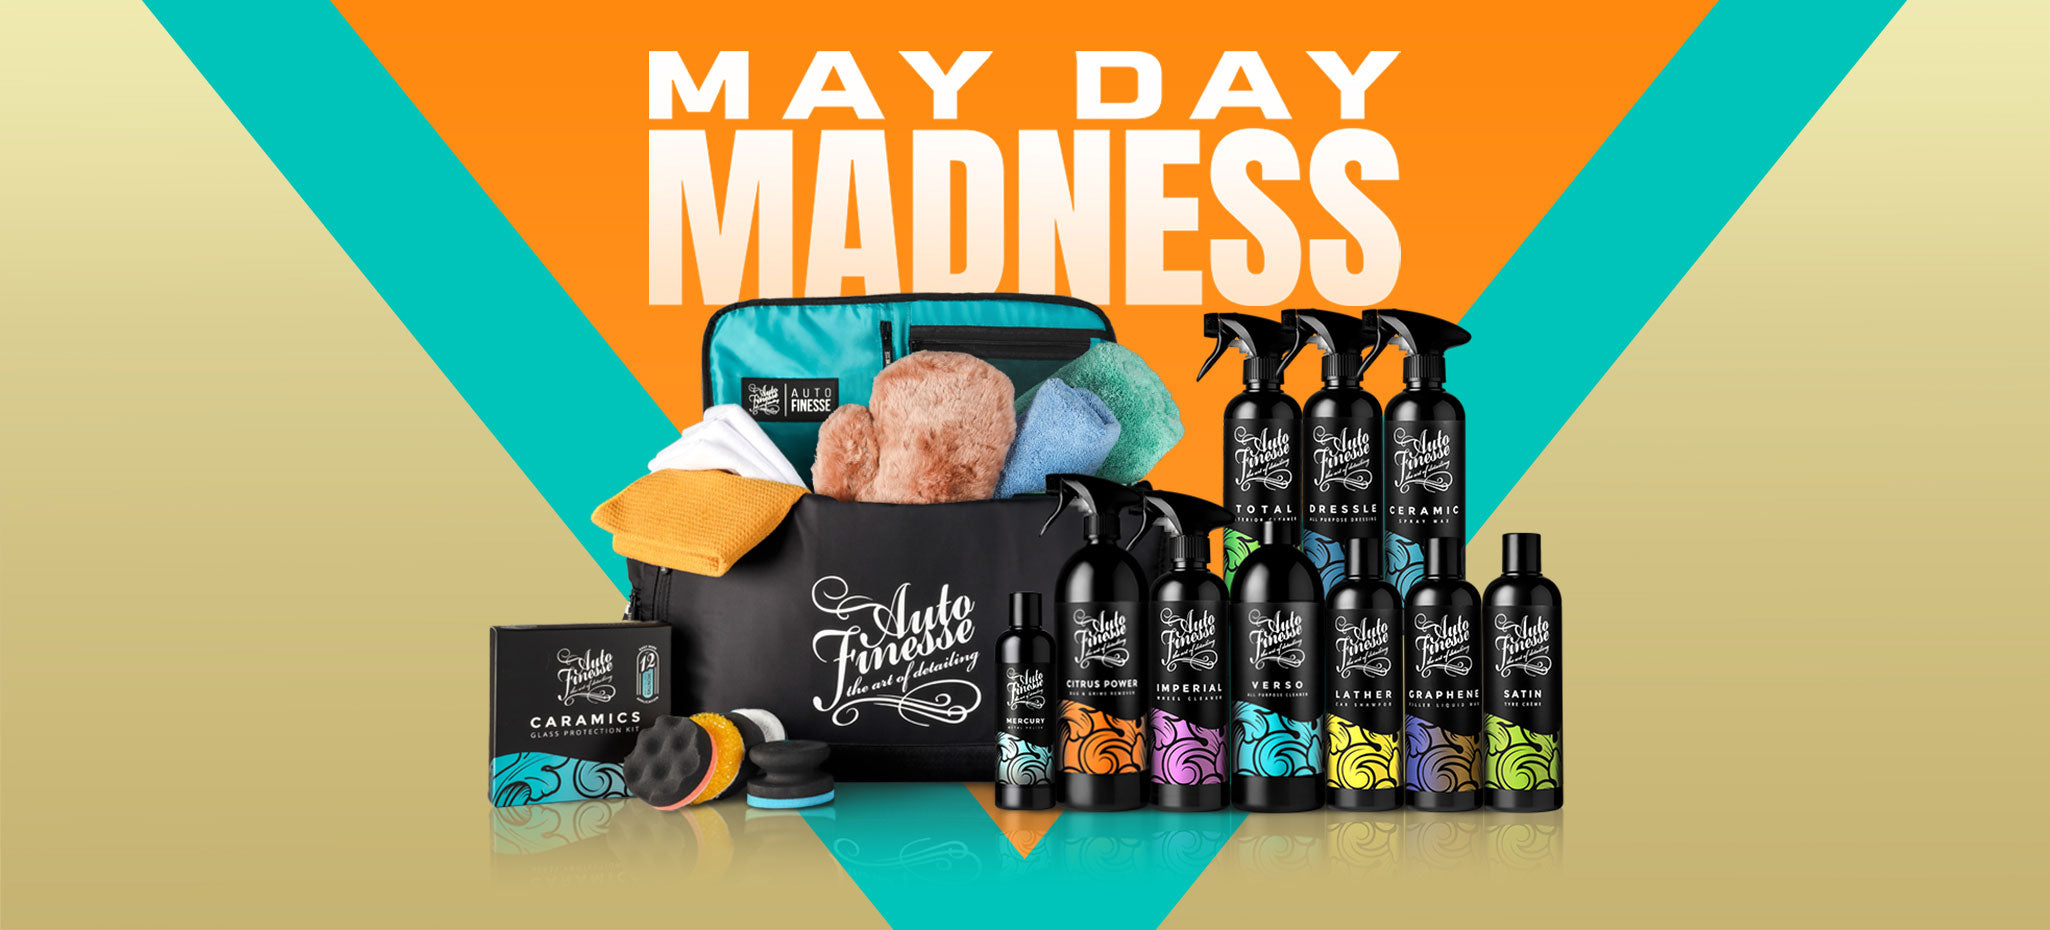 May Day Madness - Desktop Banner